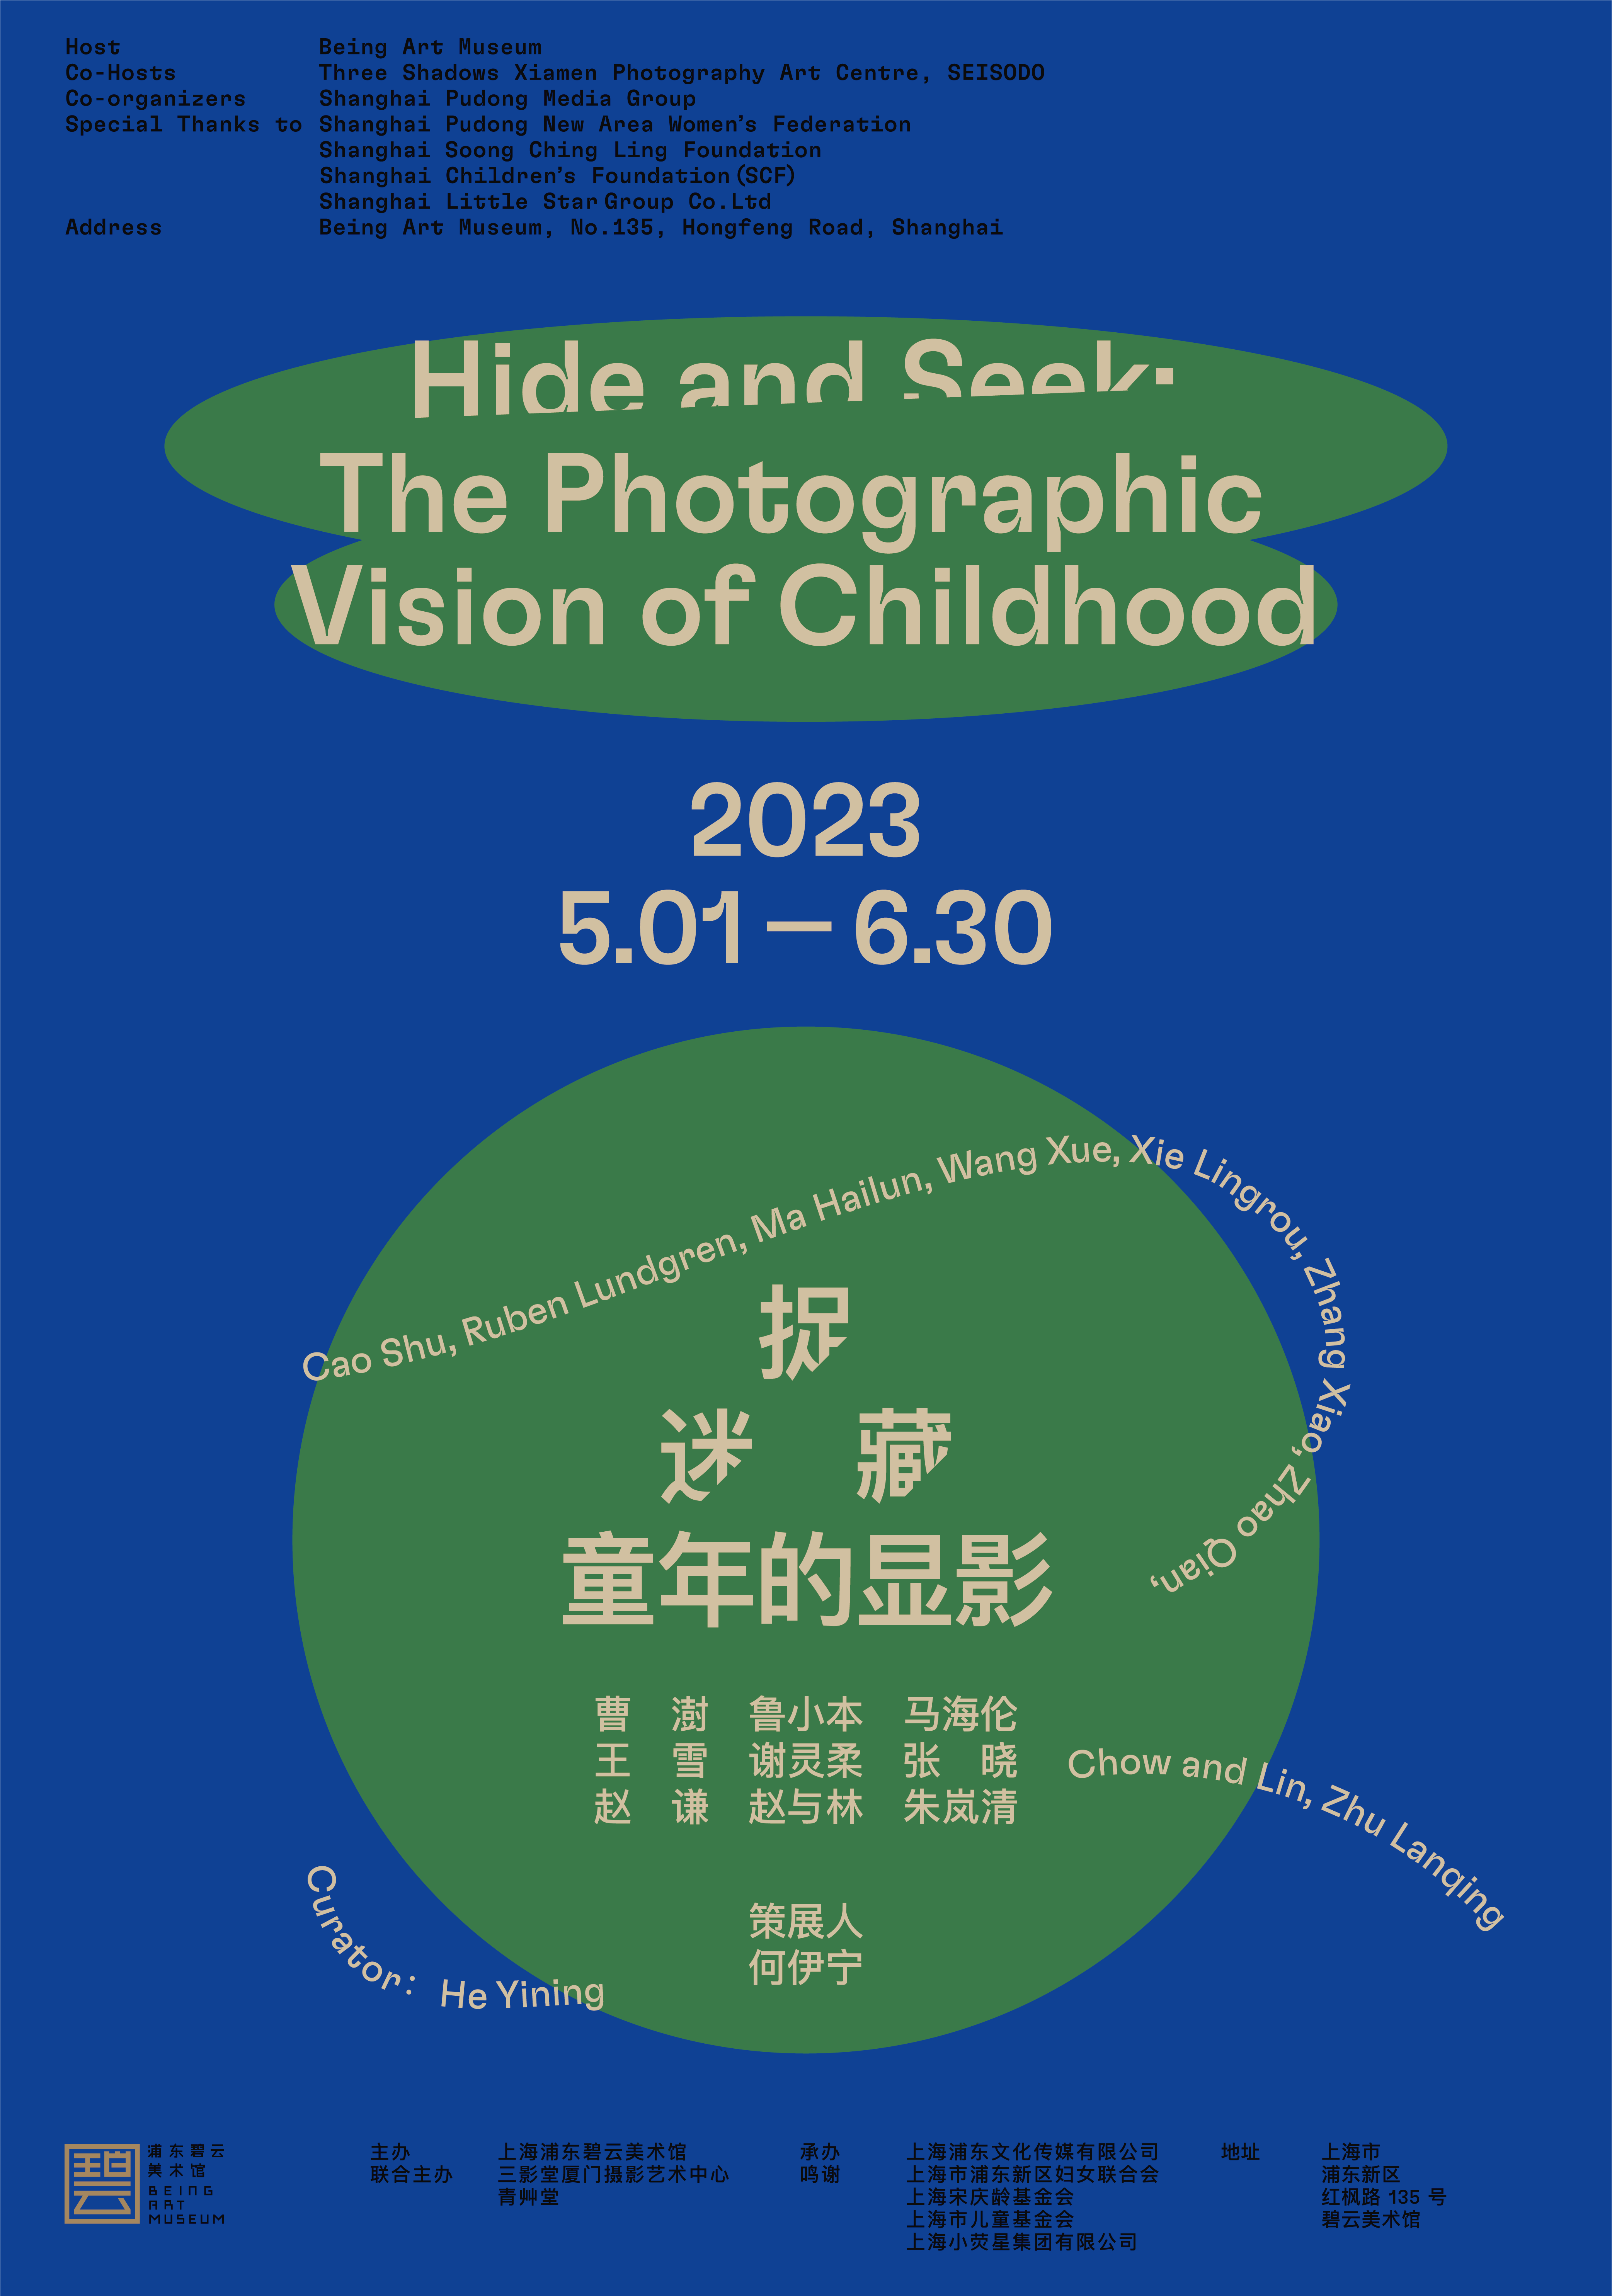 Hide and Seek: The Photographic Vision of Childhood (exhibition)  捉迷藏：童年的显影（展览）